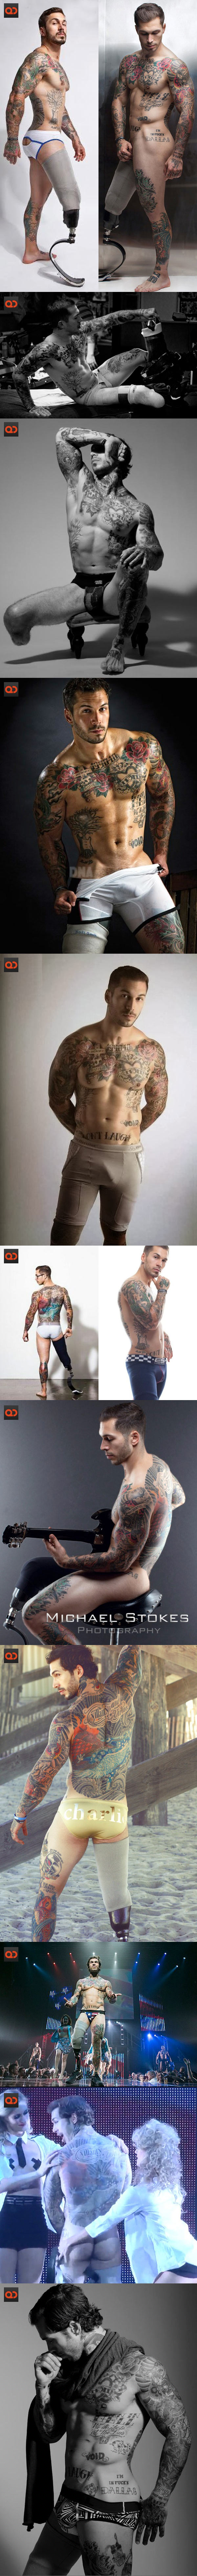 qc-why_did_alex_minsky_deleted_his_butt_from_instagram-collage02